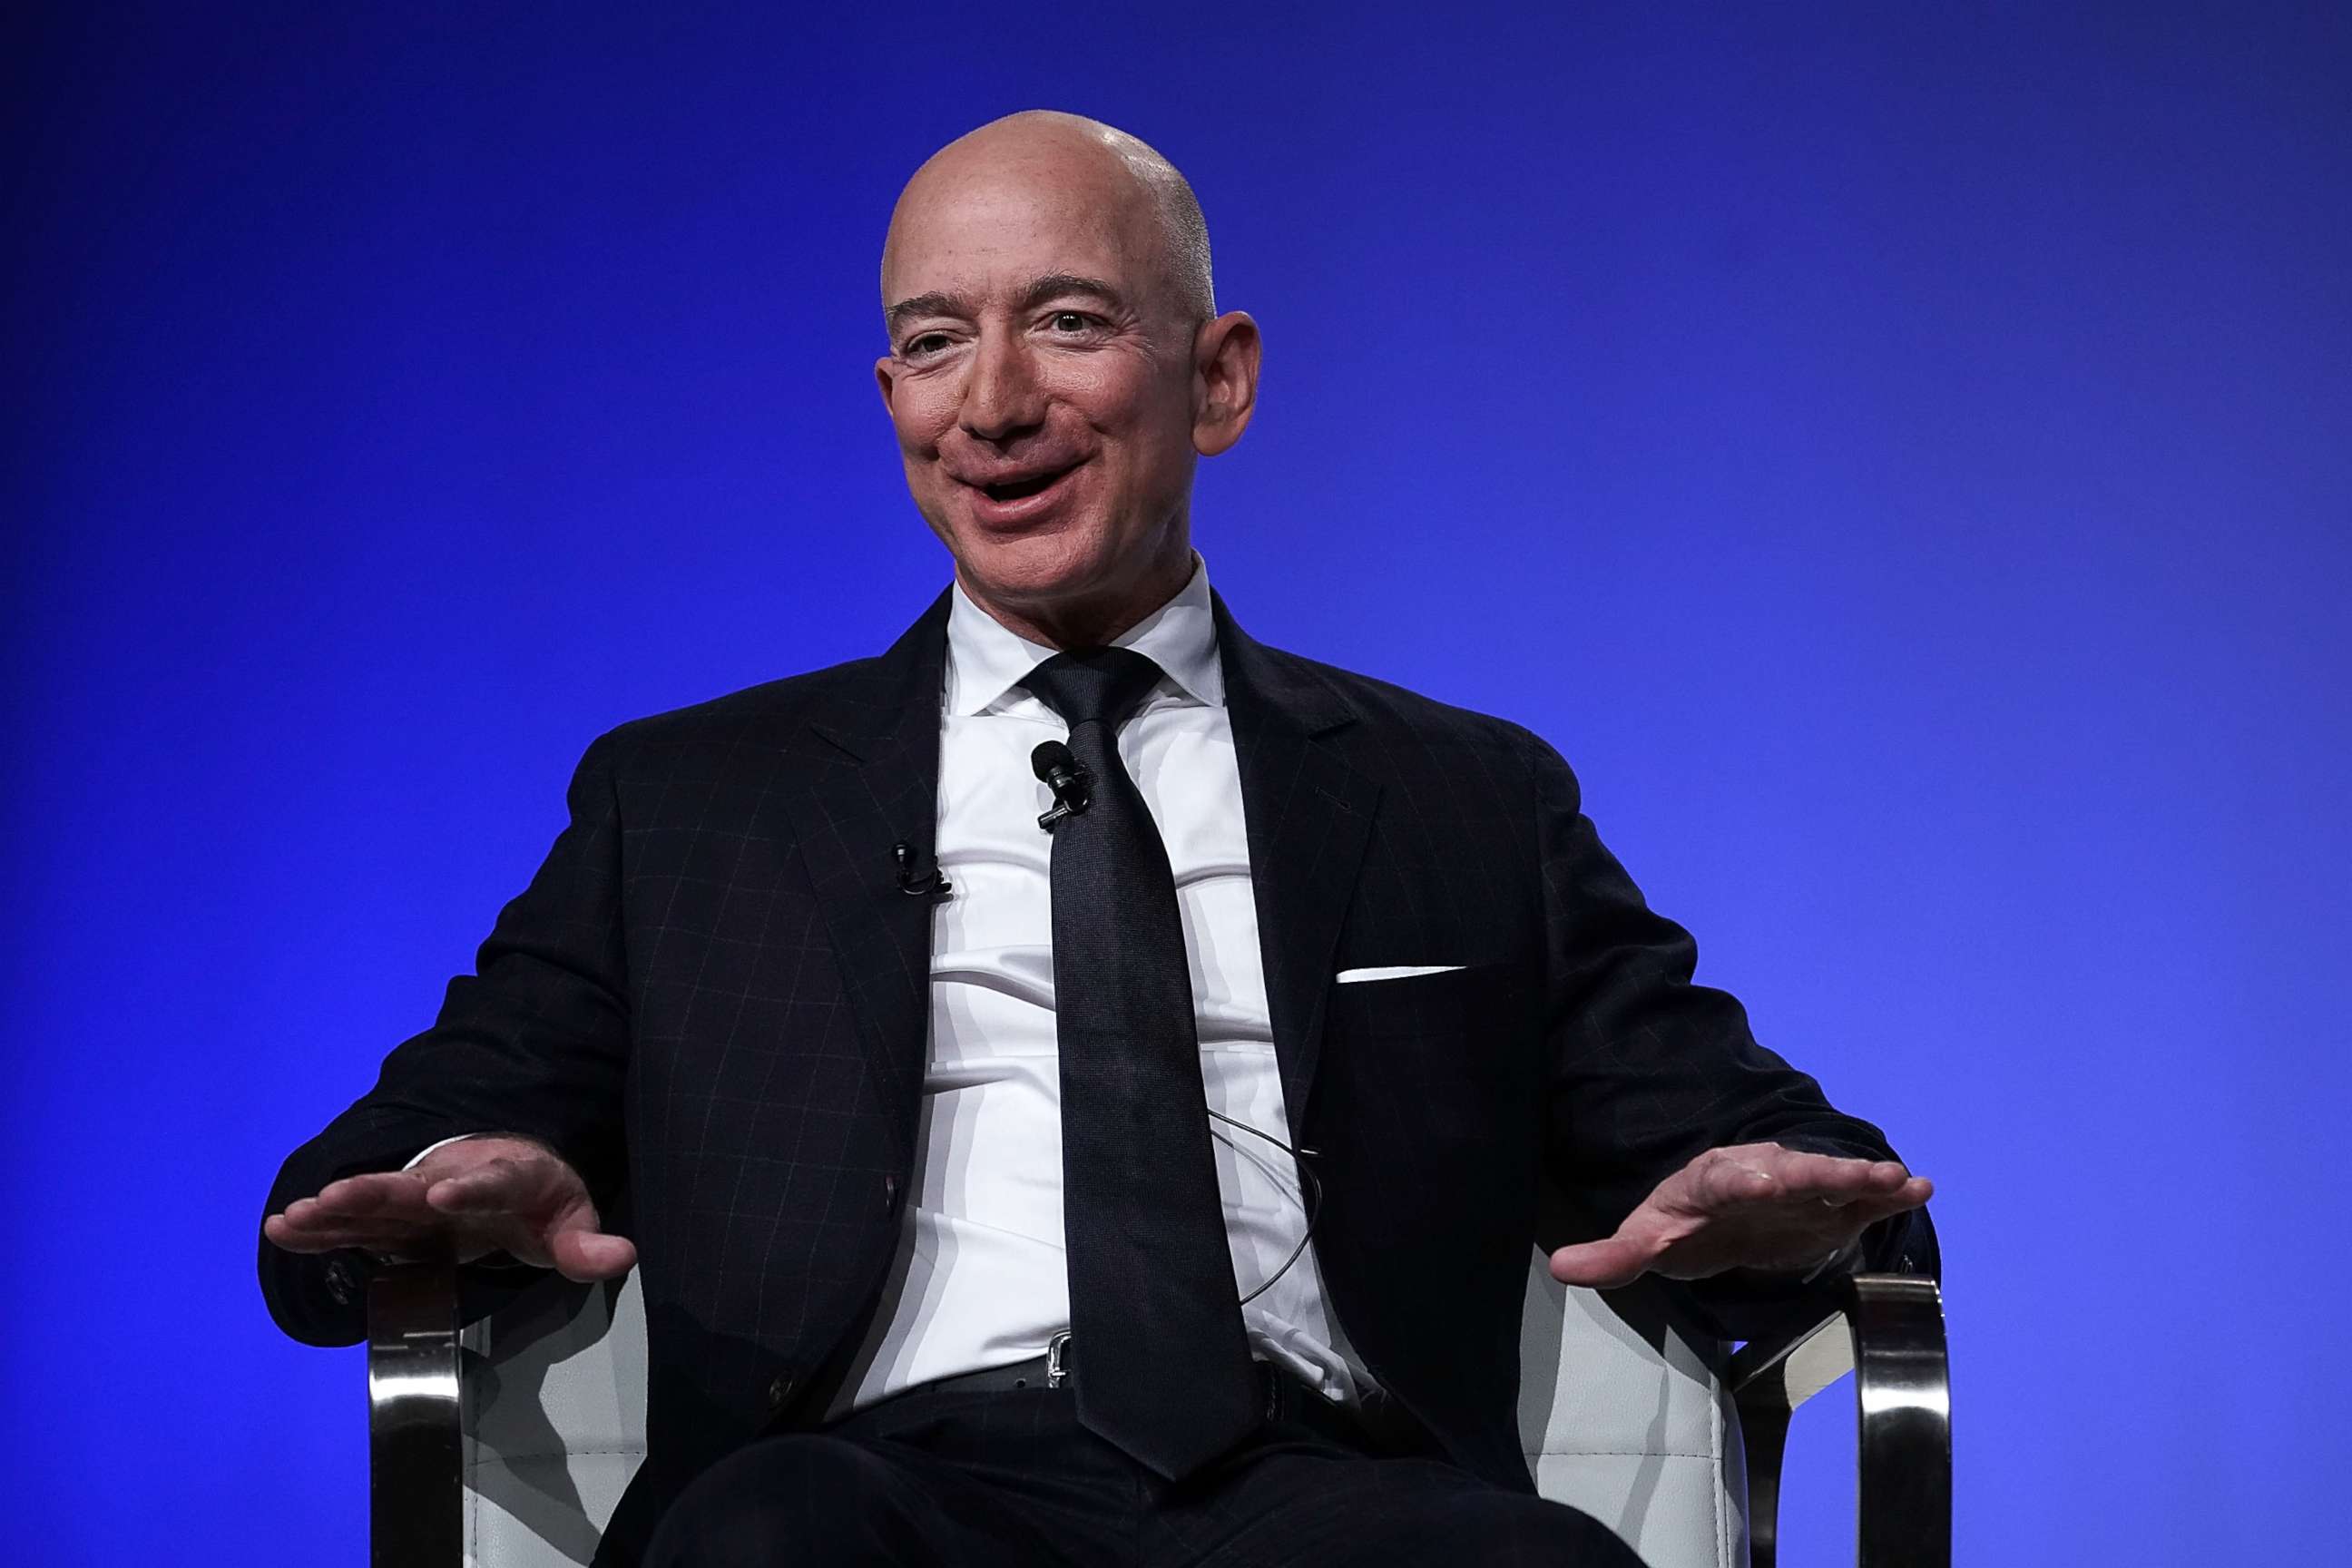 PHOTO: Amazon CEO Jeff Bezos, founder of space venture Blue Origin and owner of The Washington Post, participates in an event hosted by the Air Force Association Sept. 19, 2018, in National Harbor, Md.